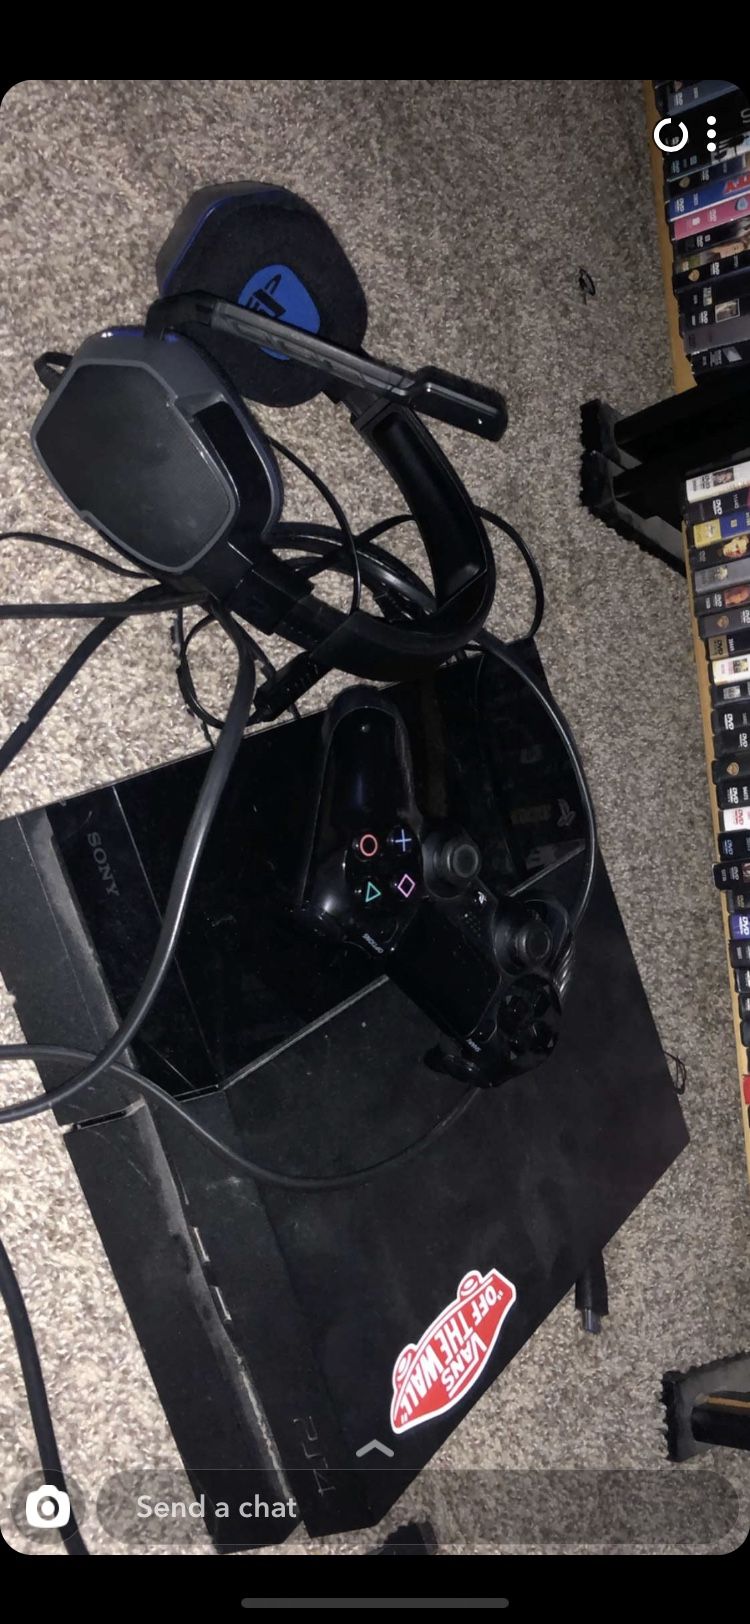 Ps4 with headset and controller